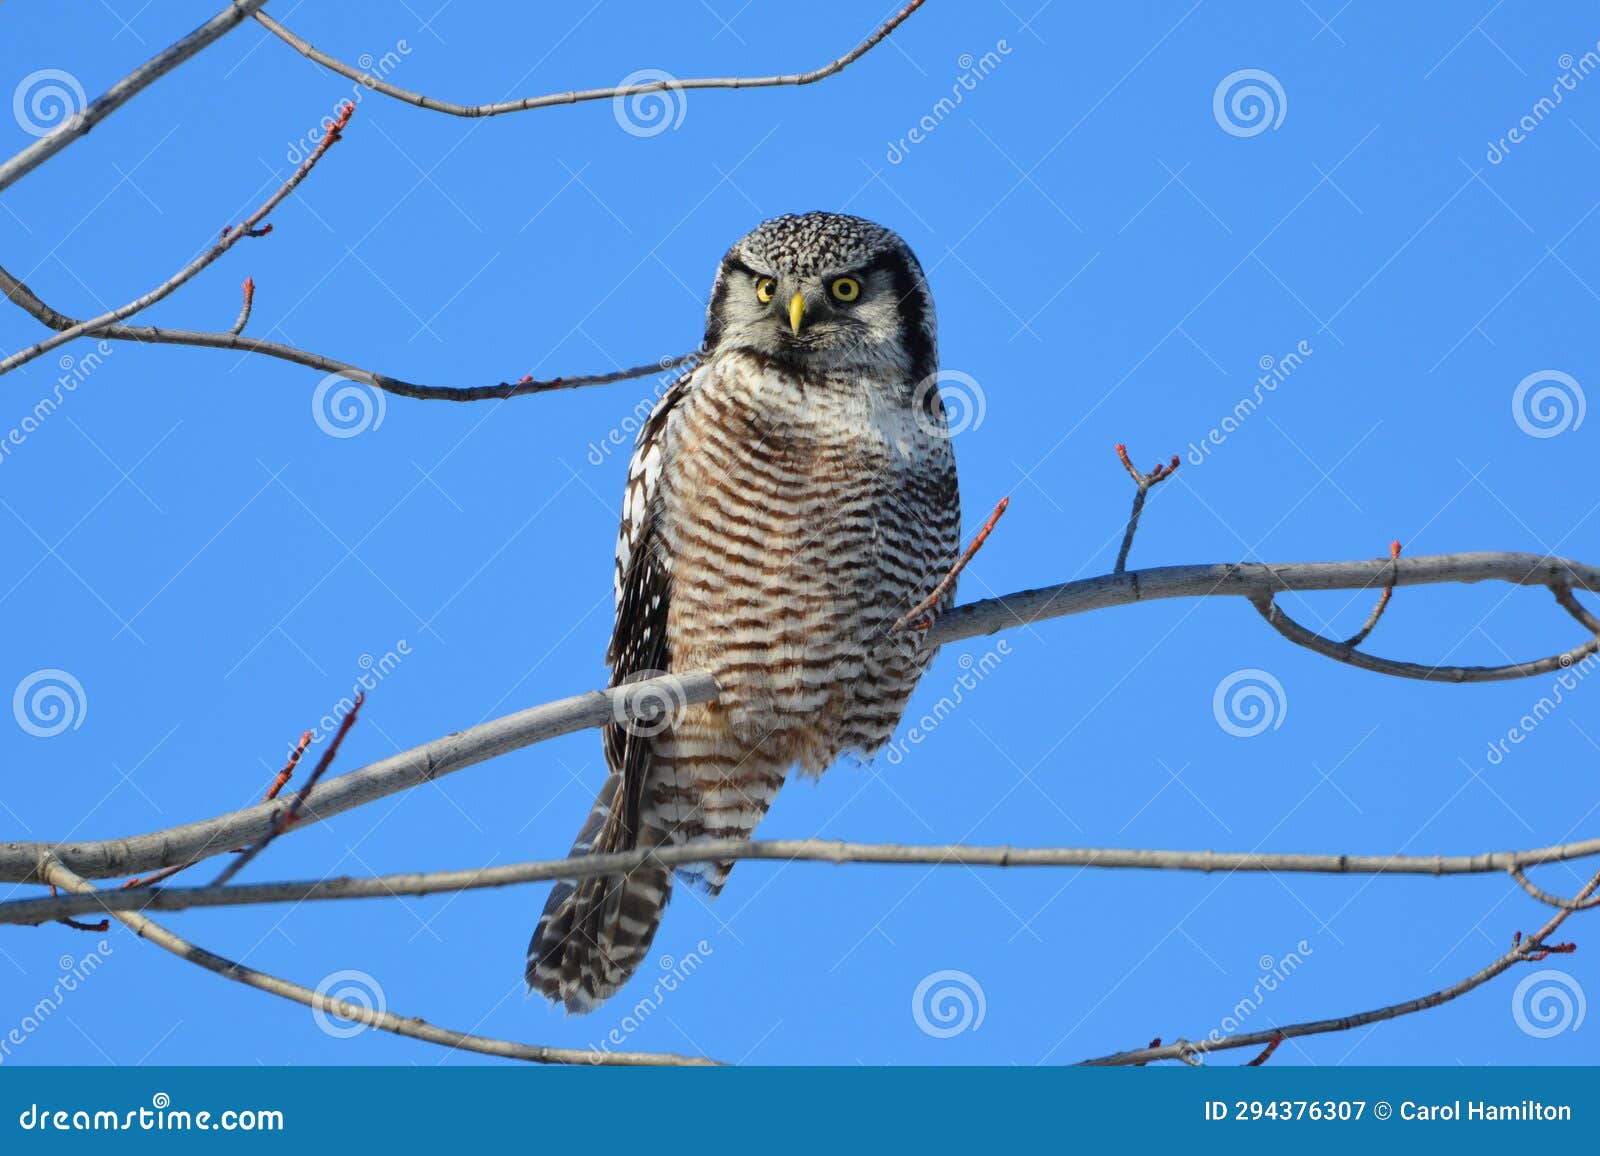 a northern hawk owl sits perched in a tree